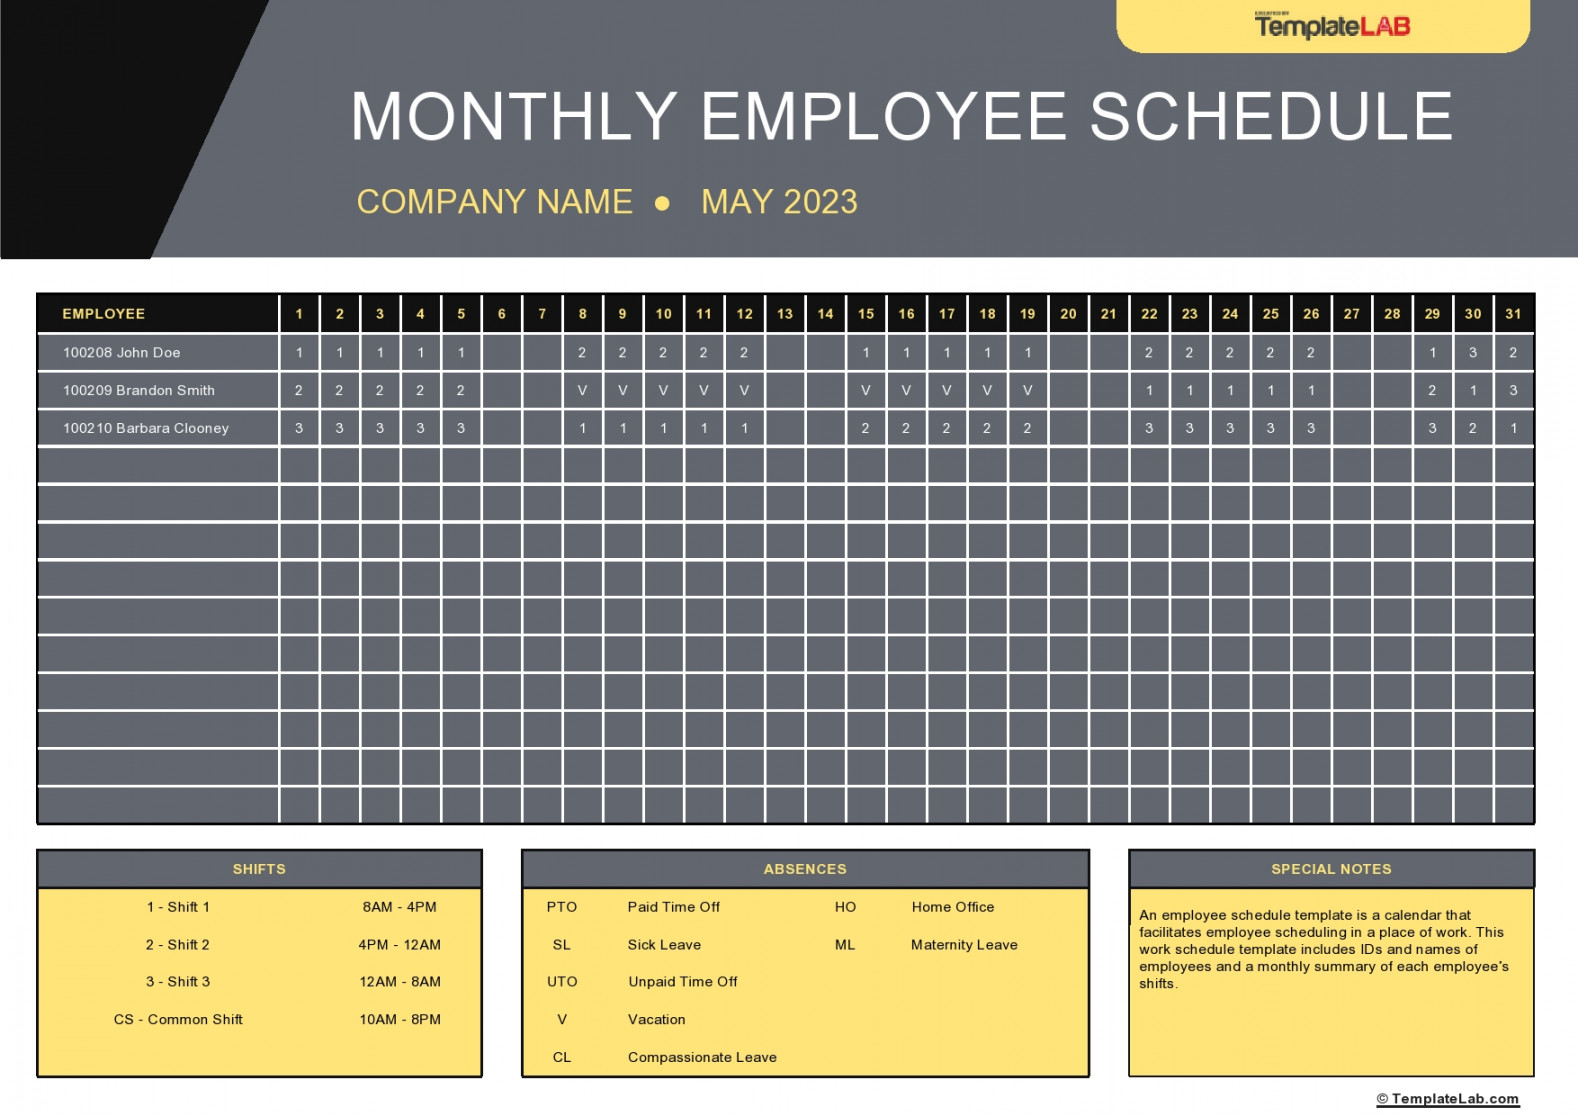 Free Employee Schedule Templates (Excel, Word, PDF)